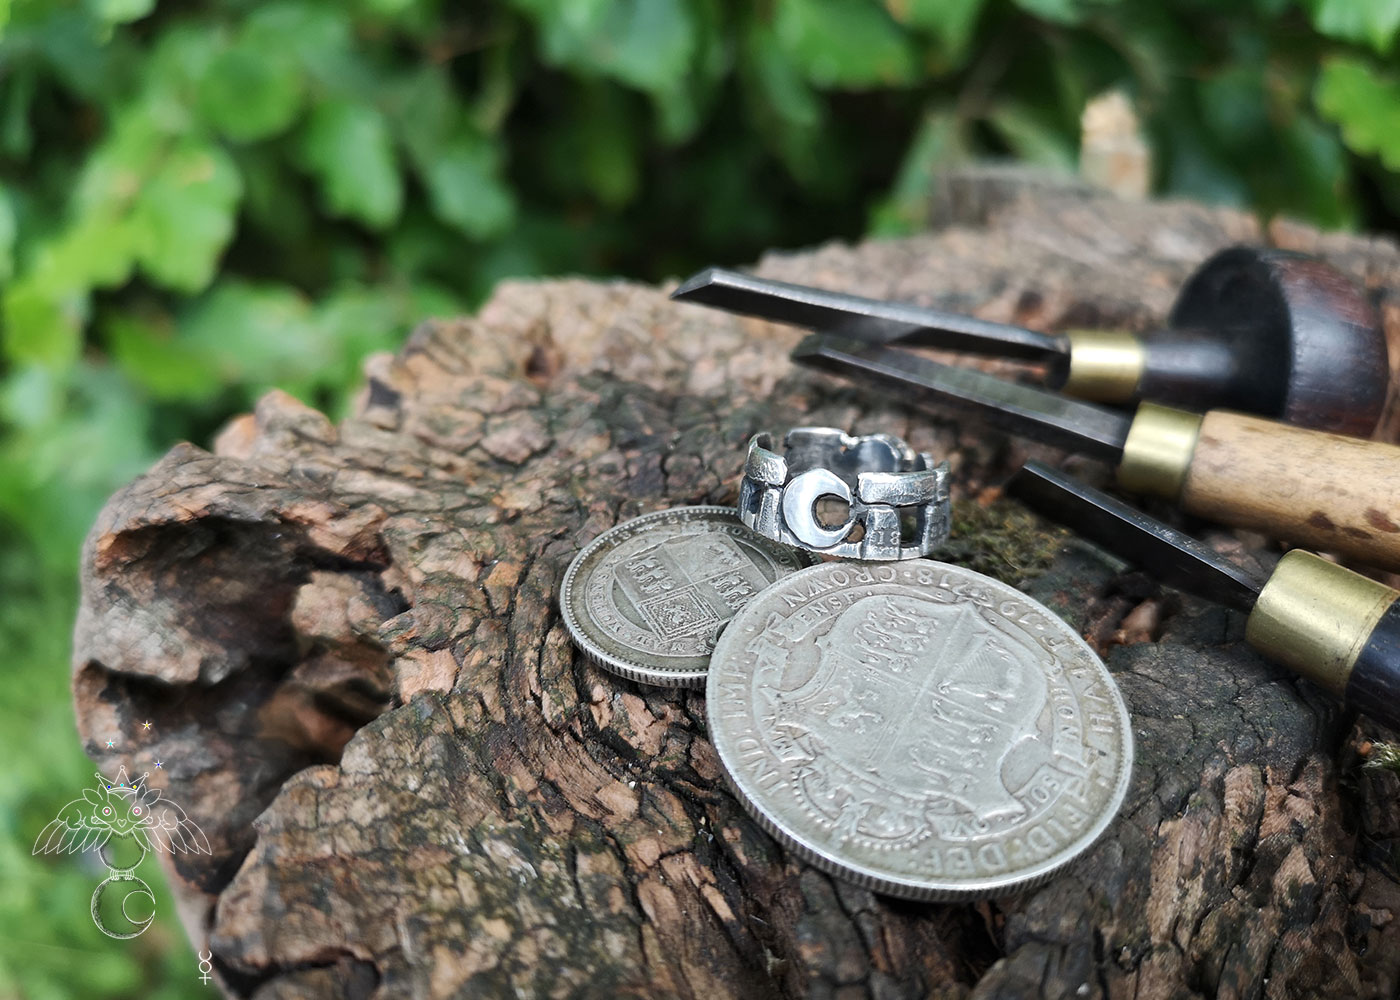 Stonehenge ring coin jewellery handcrafted with traditional hand tools and techniques from a recycled silver coin